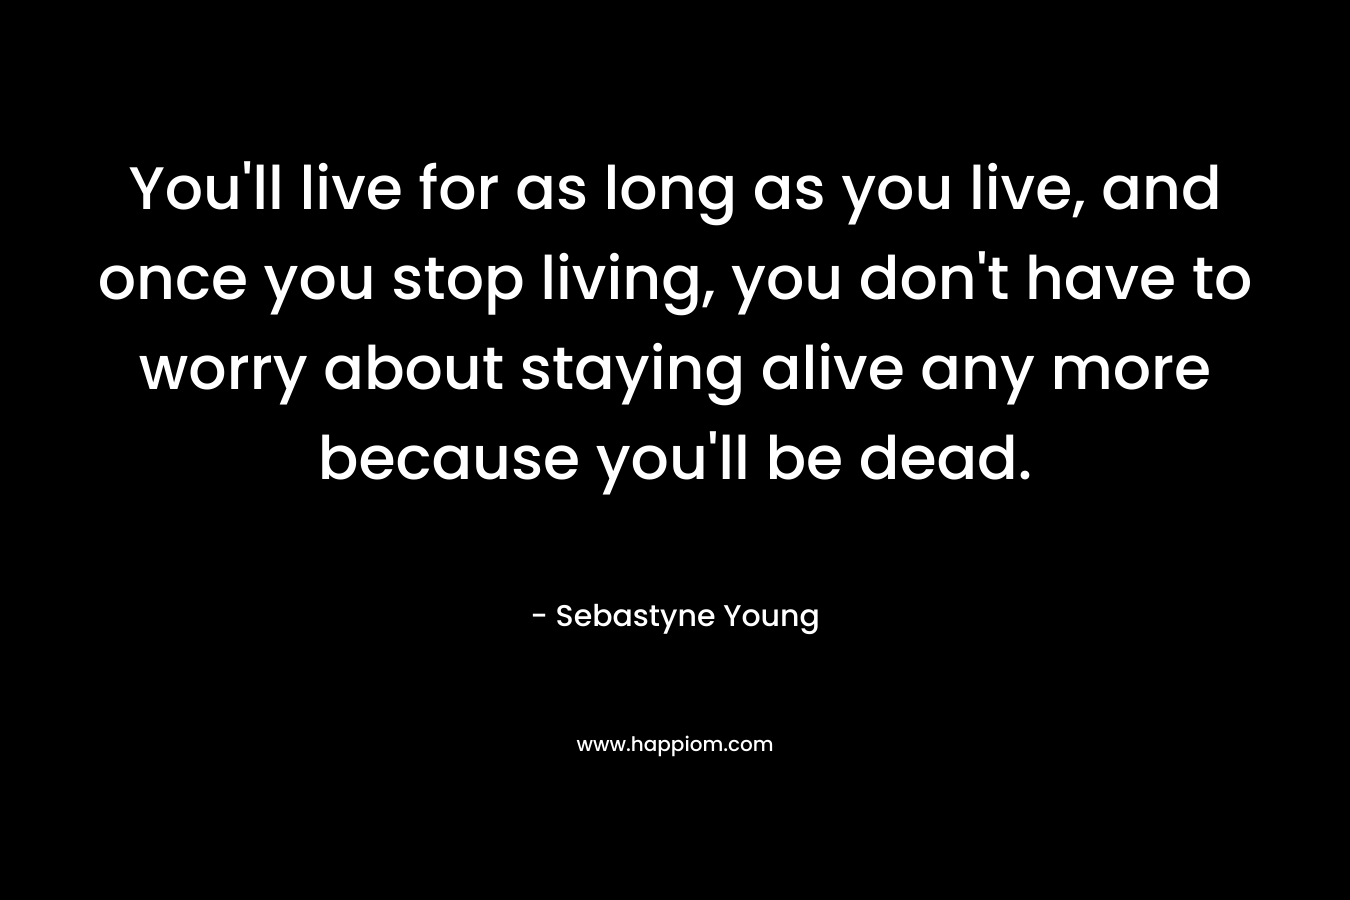 You’ll live for as long as you live, and once you stop living, you don’t have to worry about staying alive any more because you’ll be dead. – Sebastyne Young